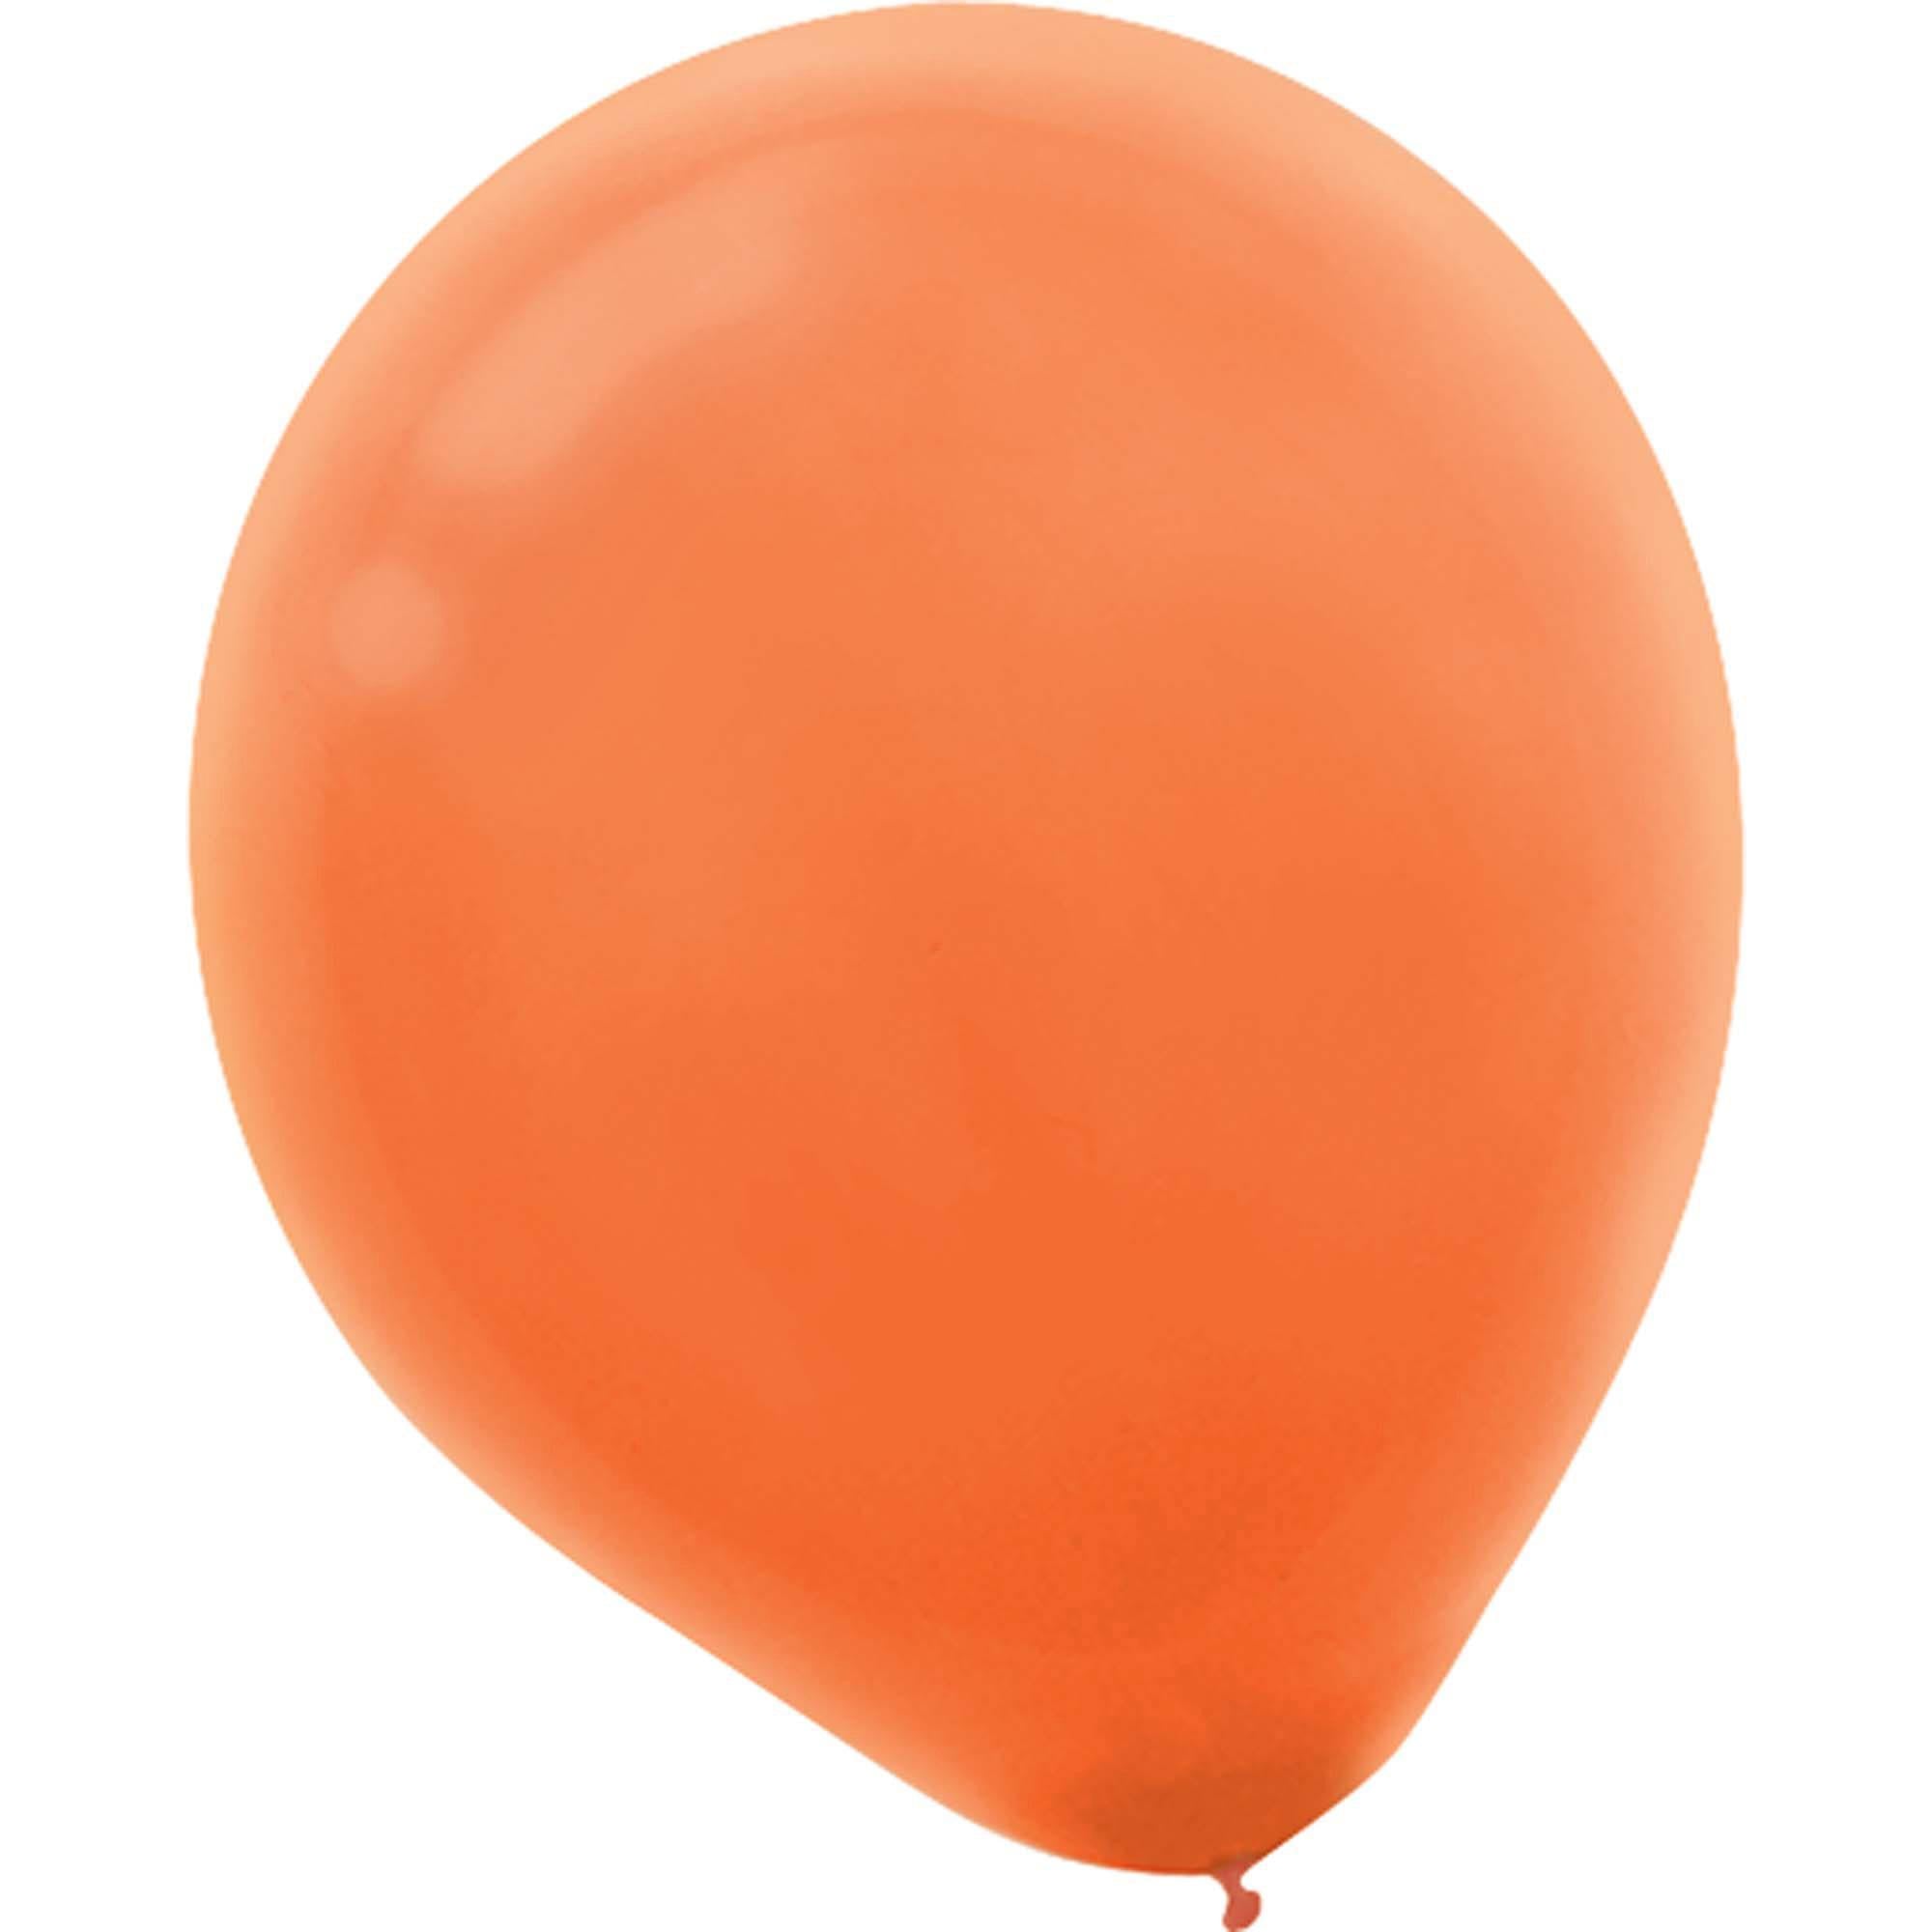 Standard Orange Latex Balloons 12in, 50pcs Balloons & Streamers - Party Centre